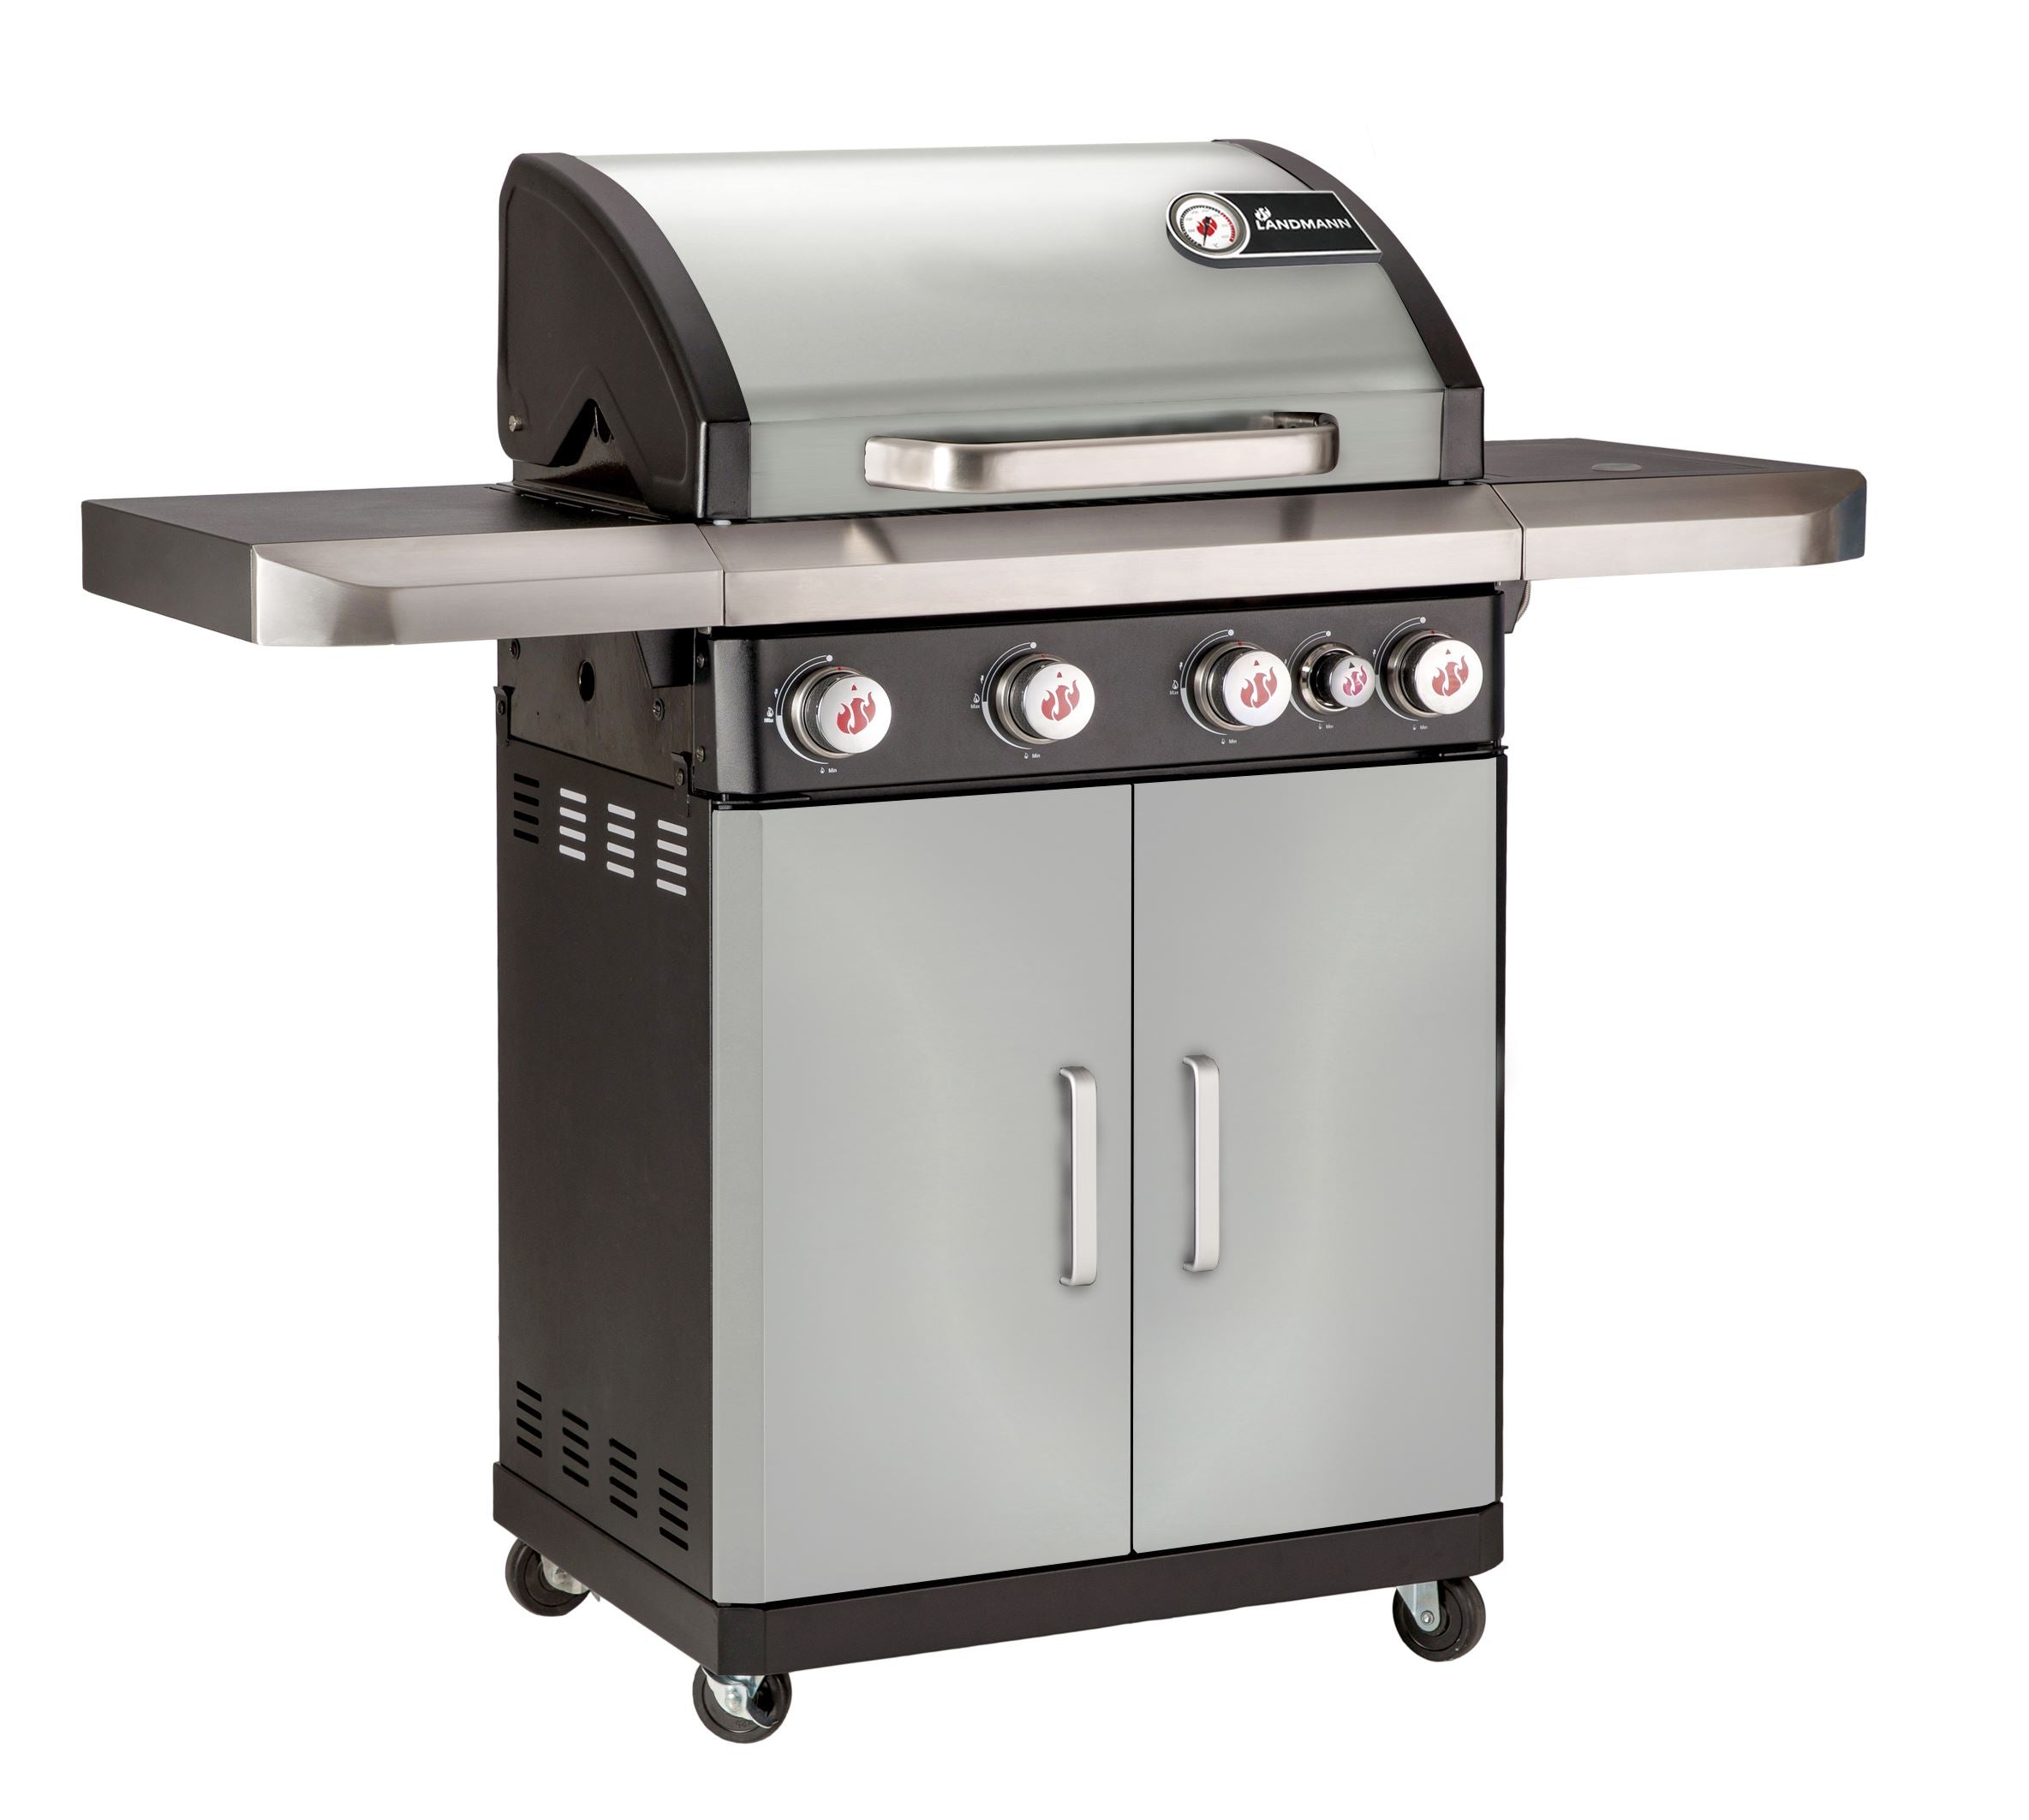 Rexon cooK 4.1 Gas BBQ - Stainless Steel & Weatherproof Cover